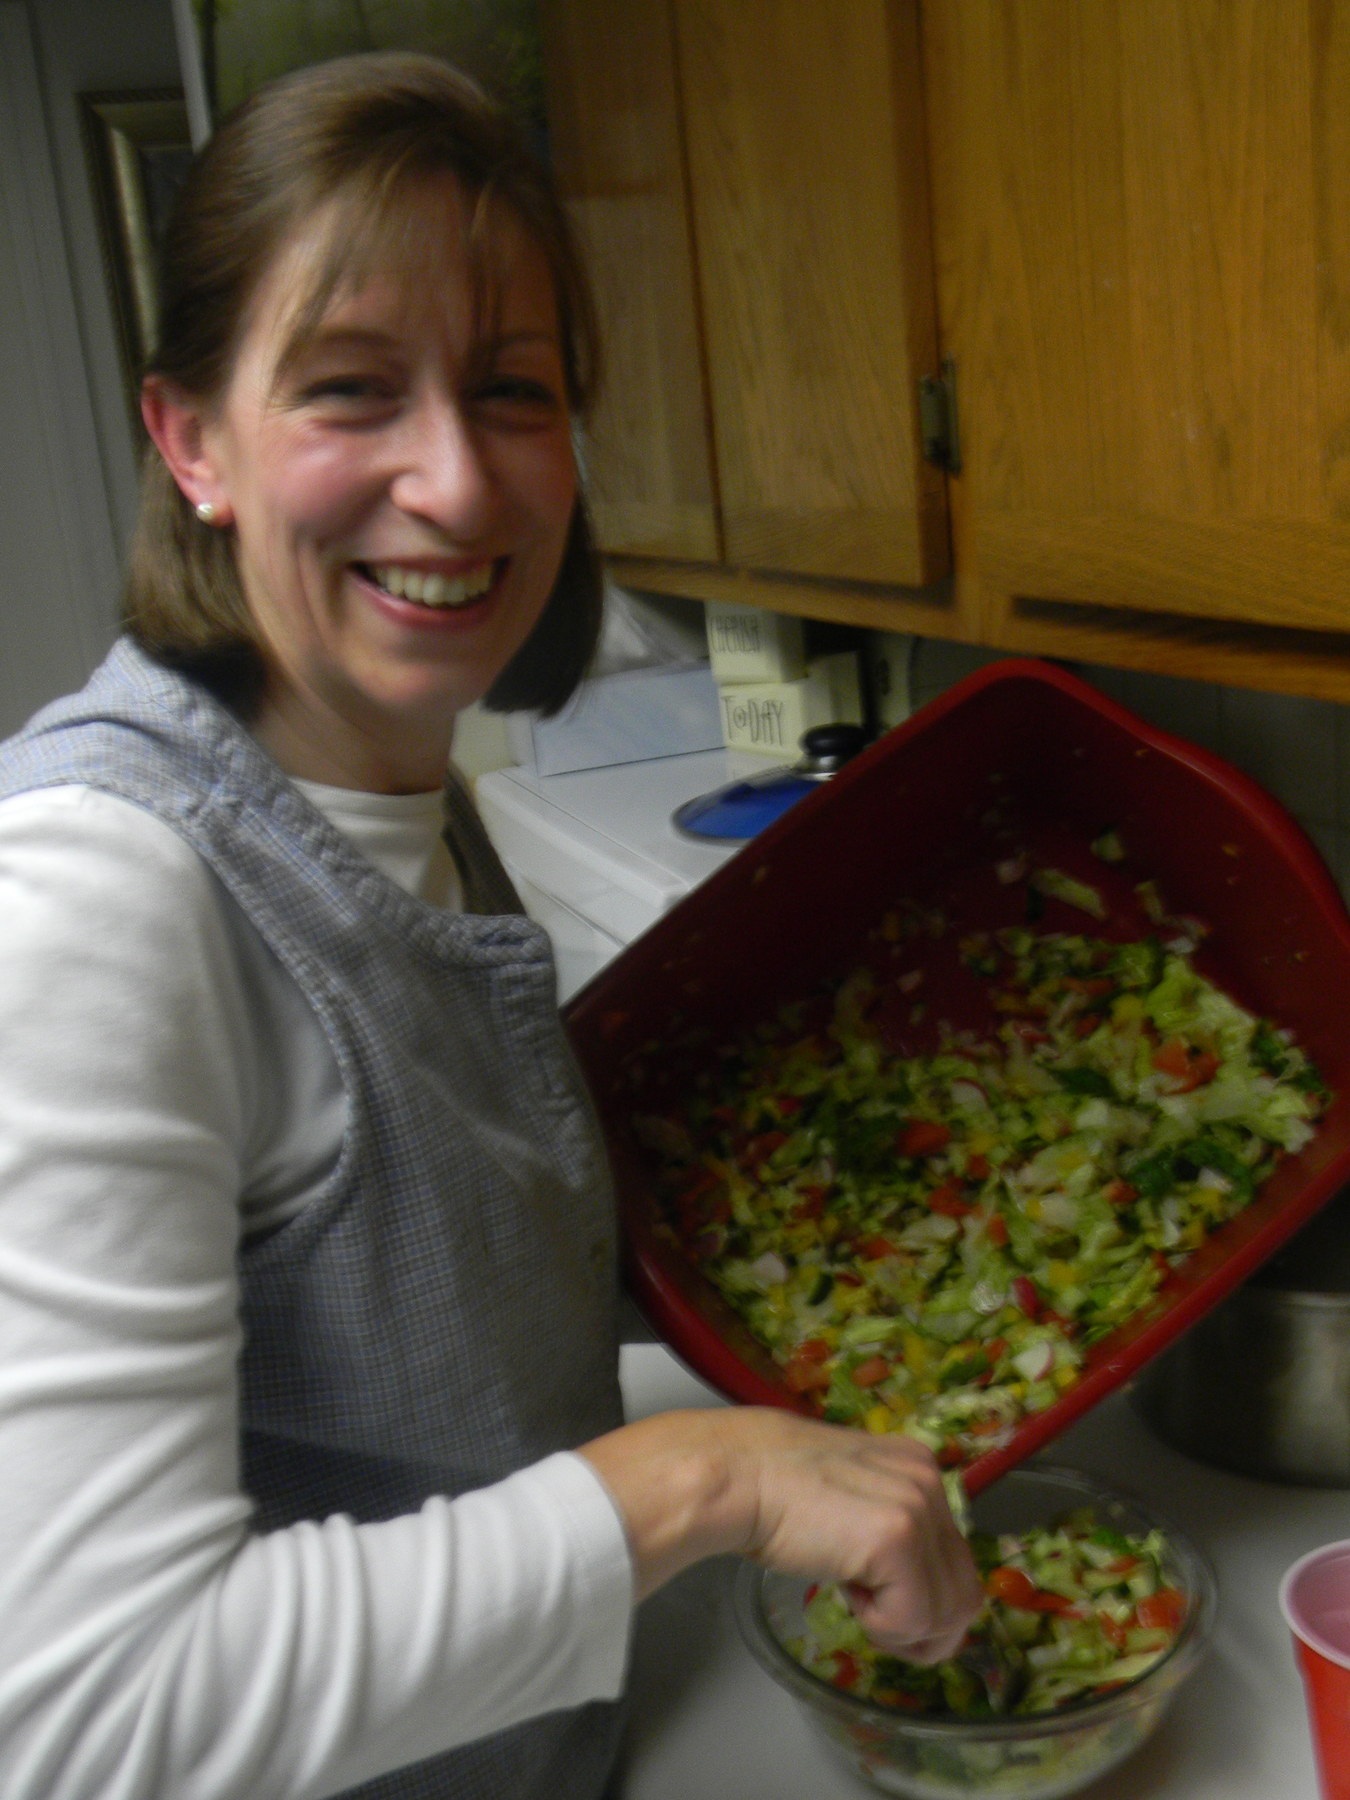 Susan (she's American but speaks almost perfect German) dishing up the salad